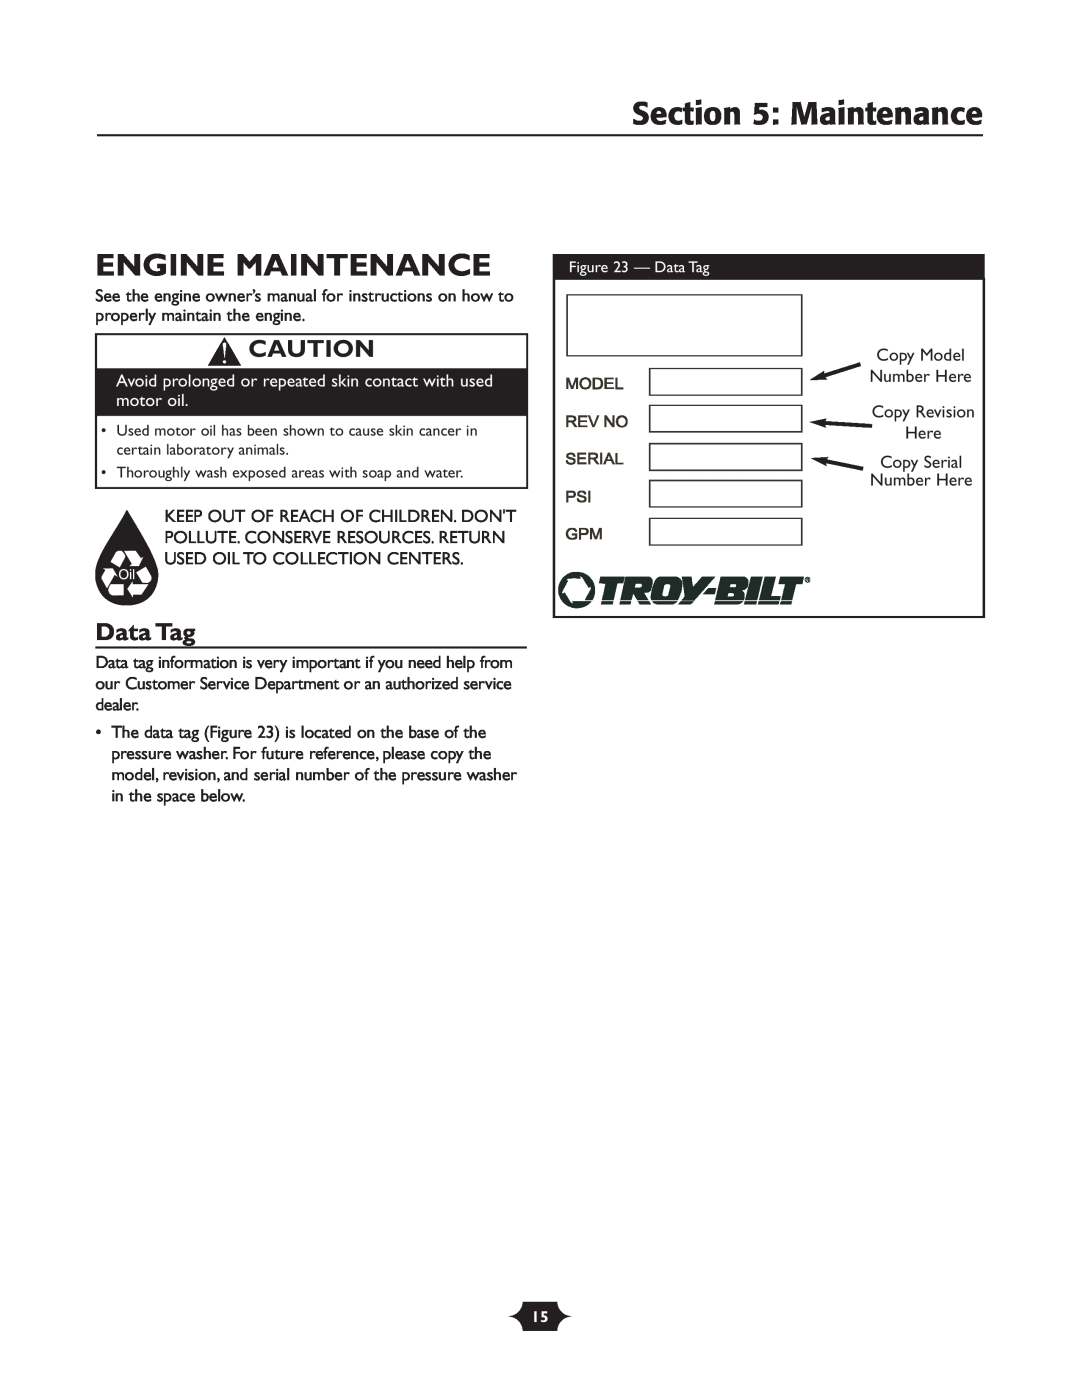 Briggs & Stratton 20209 Engine Maintenance, Data Tag, Avoid prolonged or repeated skin contact with used motor oil 